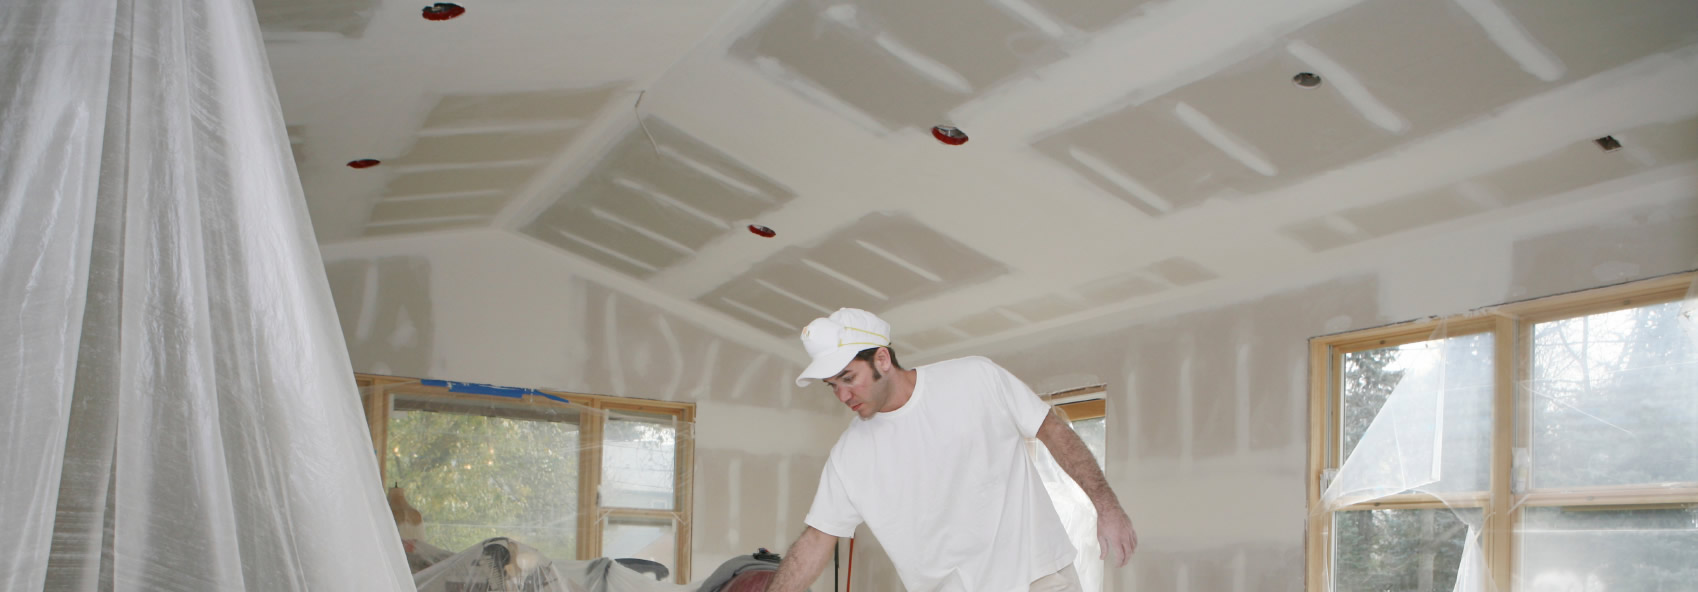 Plasterboard Ceiling Installation Cost